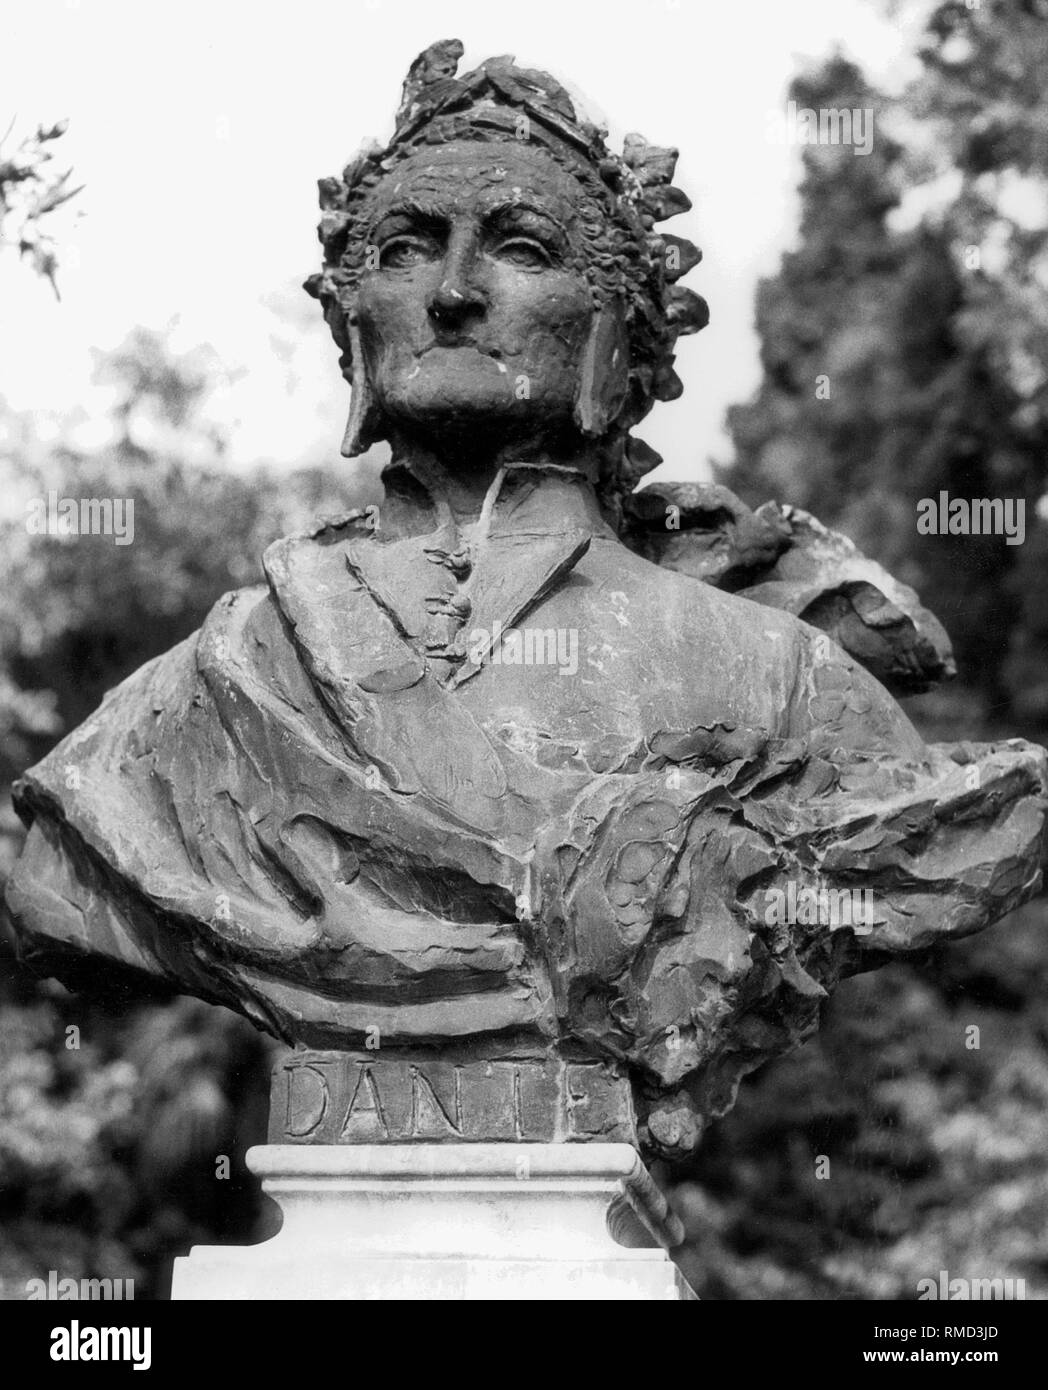 The bust of Dante Alighieri, the famous Italian poet, stands in Torbole at Lake Garda. He lived from 1265 to 1321. Stock Photo